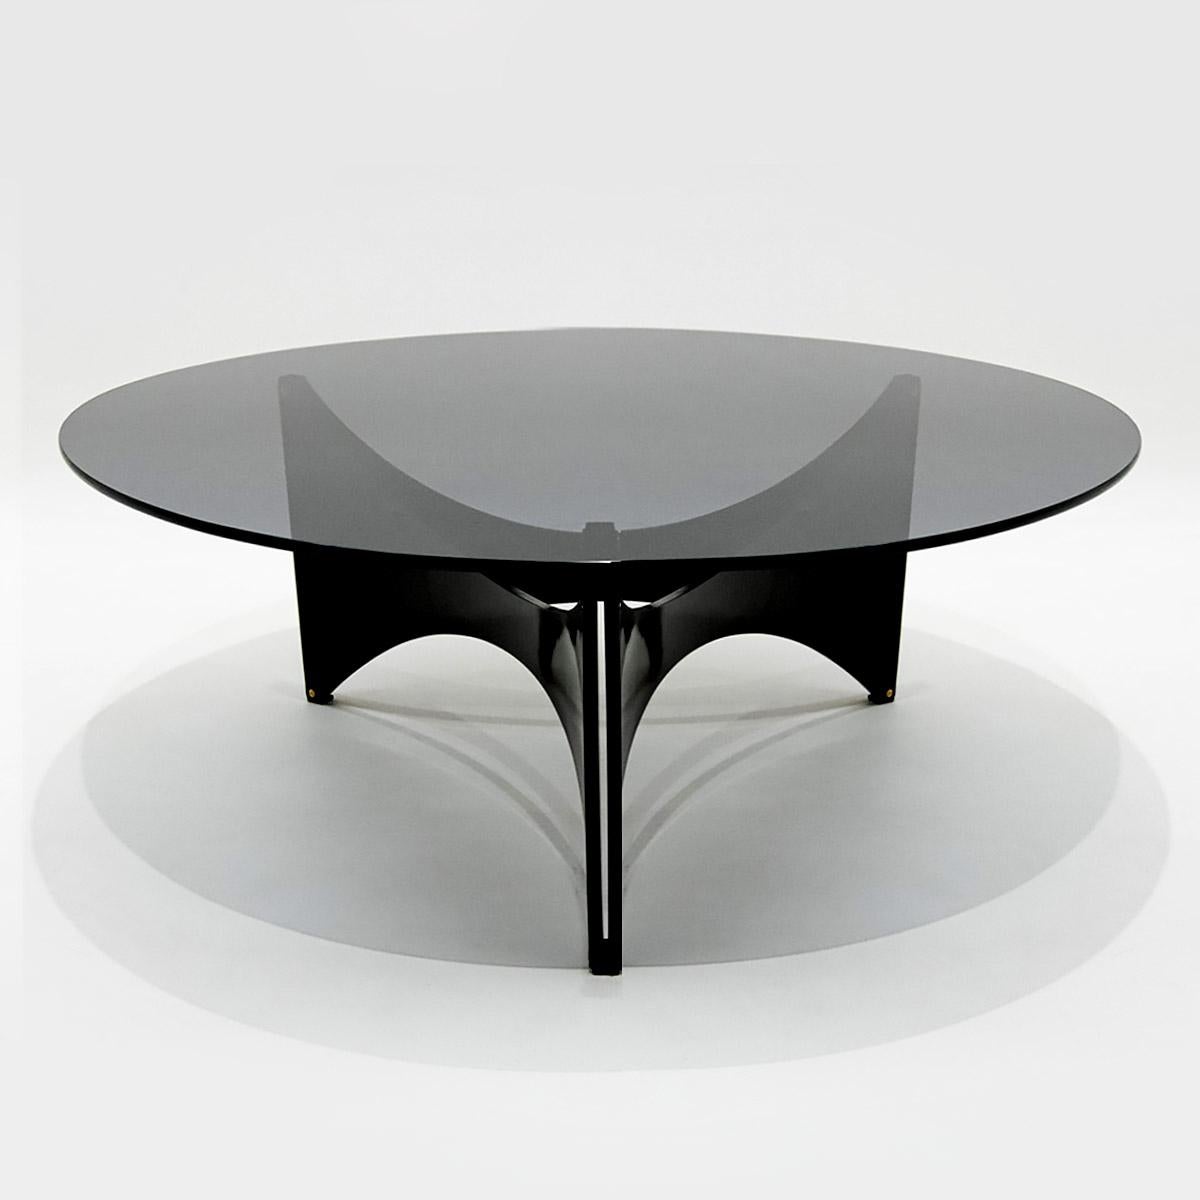 Vintage retro 1960s Werner Blaser tinted circular glass coffee table with black curved triangular plywood base for ‘t Spectrum.

Having worked with both Alvar Aalto and Mies van der Rohe the architect, designer and publicist Werner Blaser